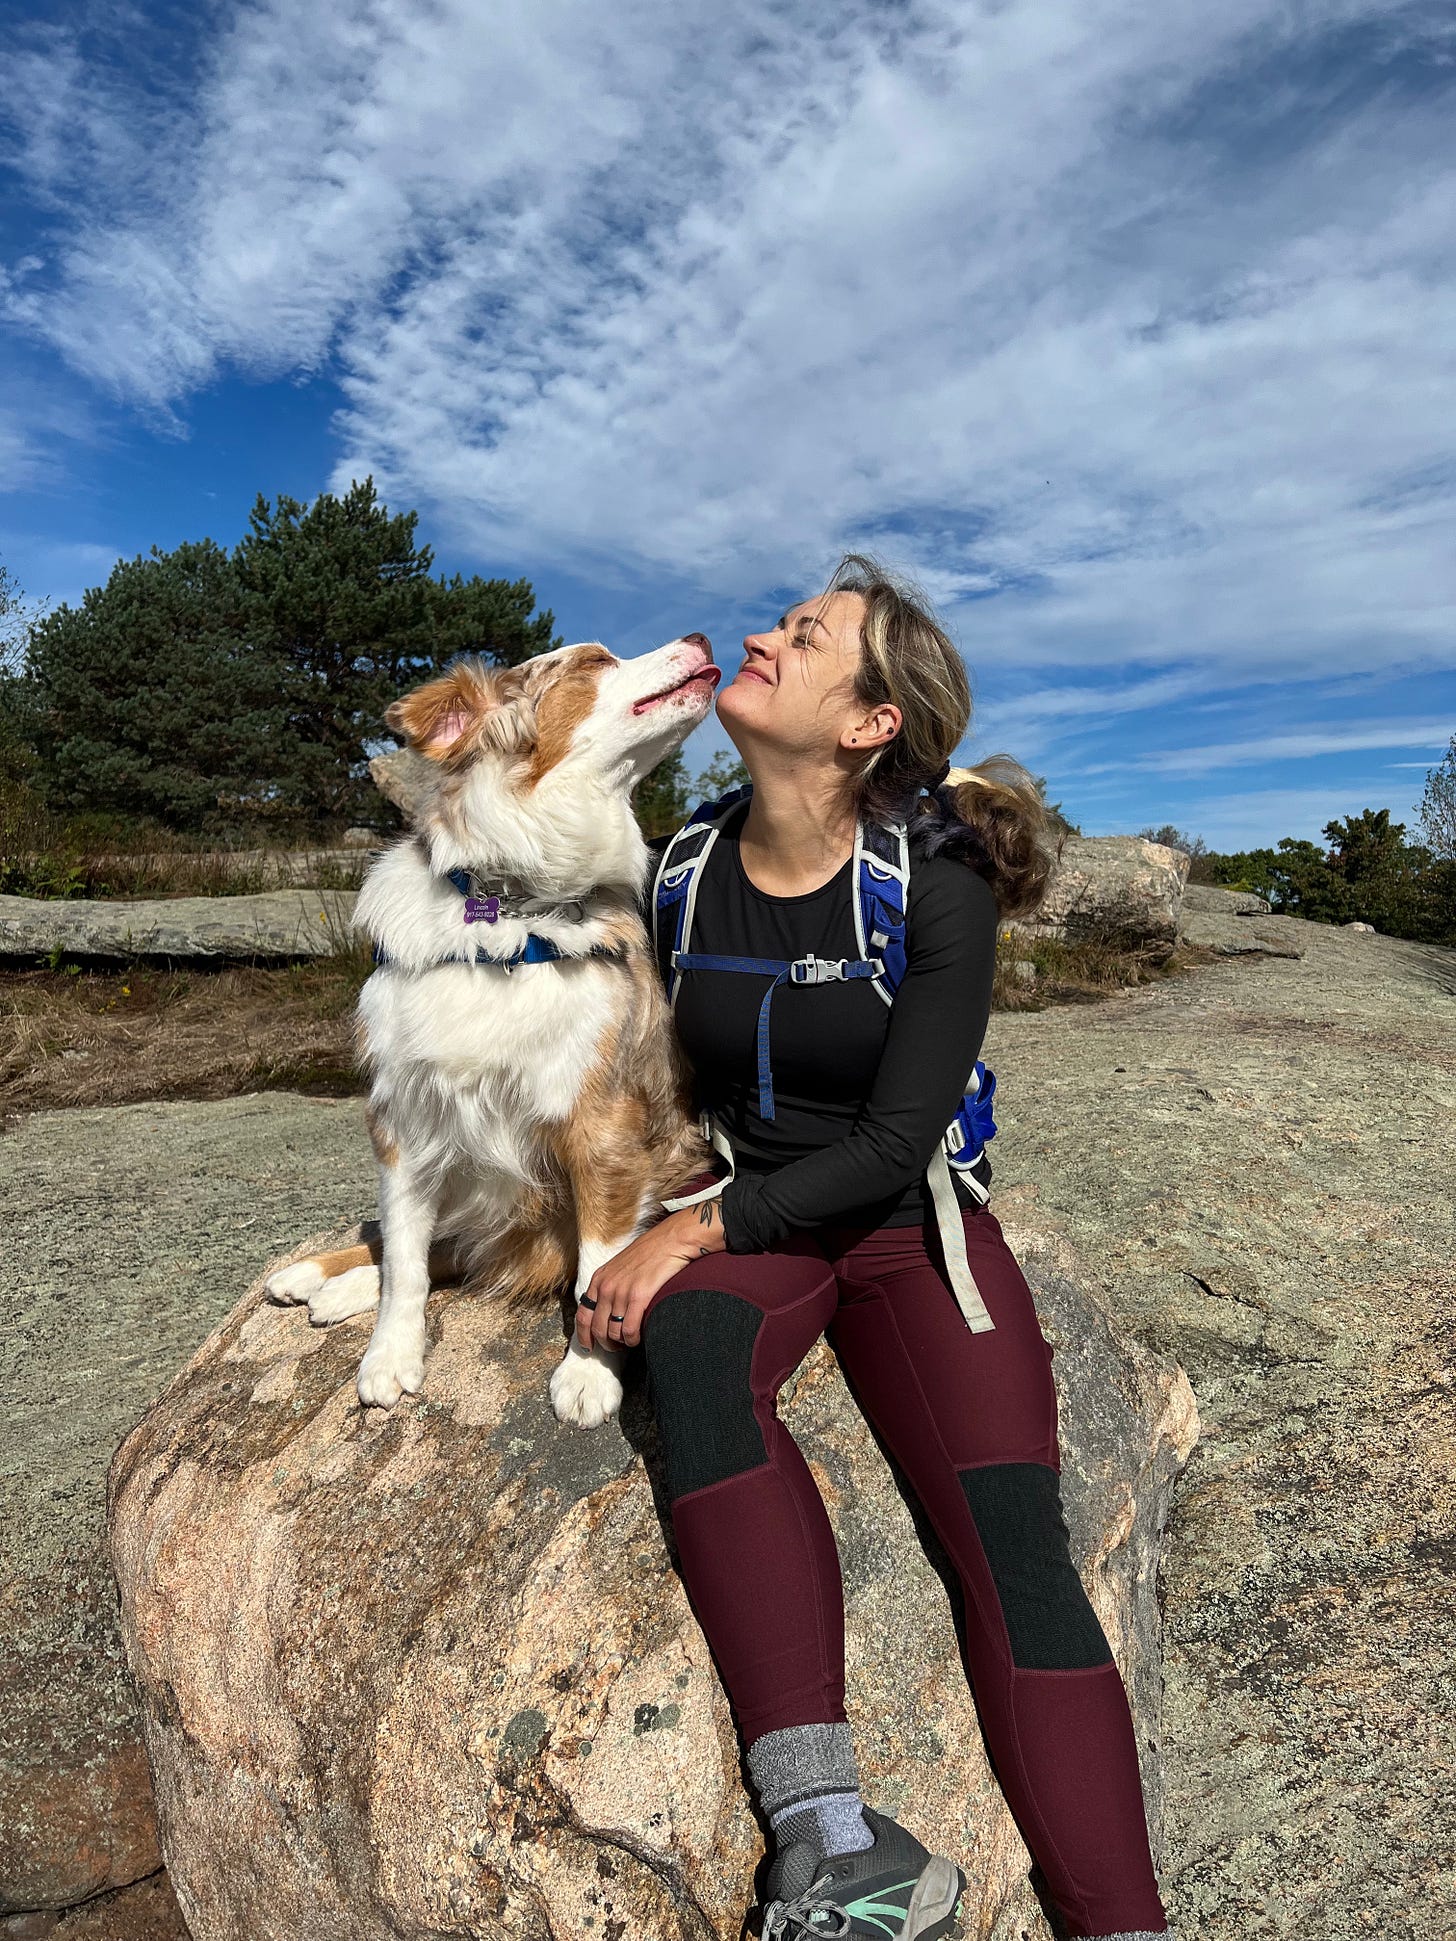 a dog licking a woman's face